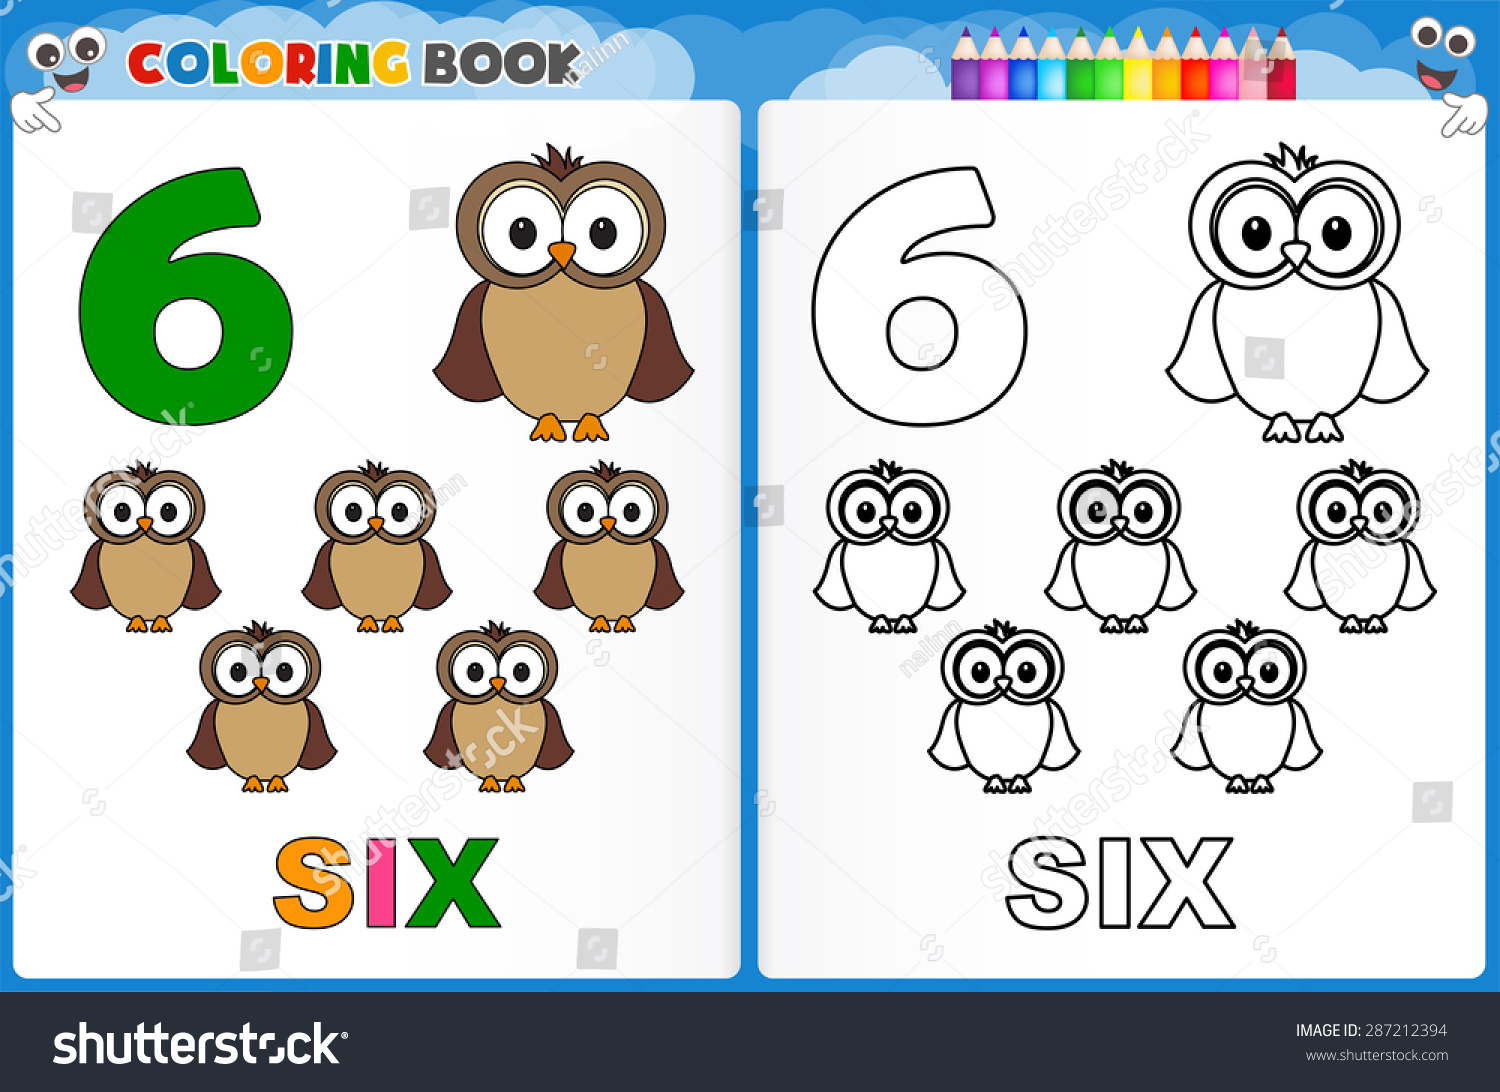 Coloring Pages Numbers Preschool / 1 10 Coloring Page Worksheets